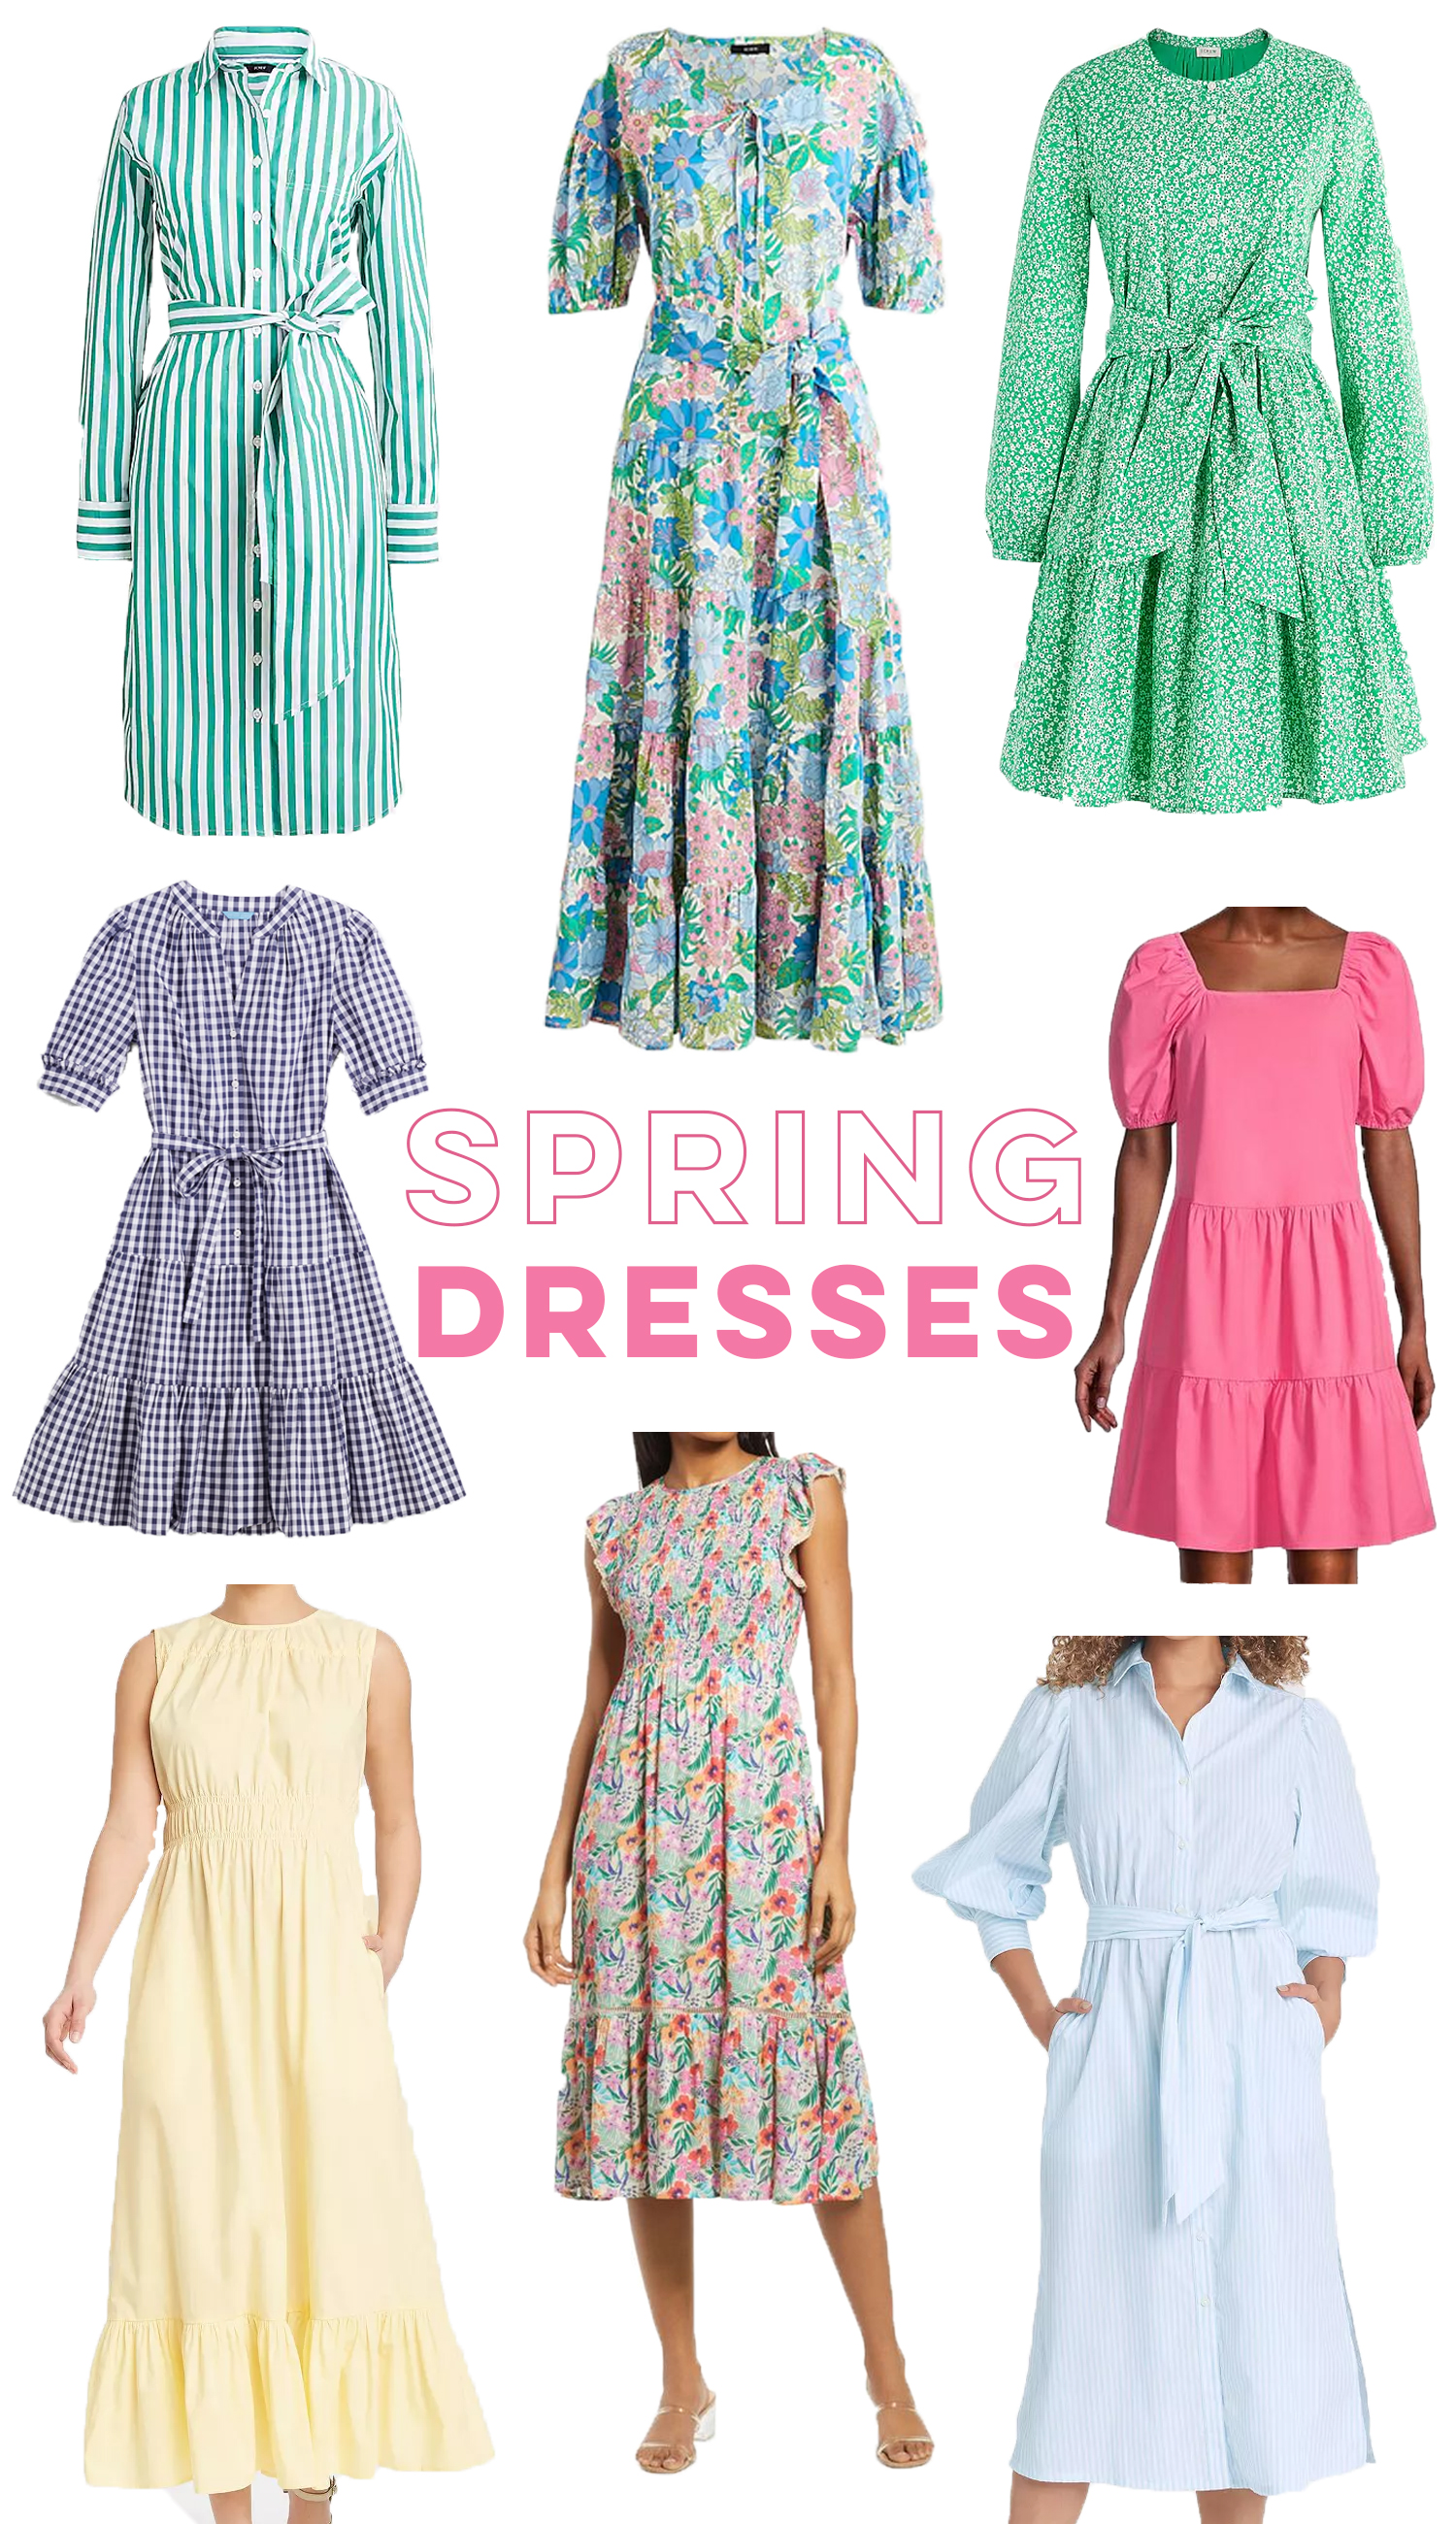 Spring Dresses Under $100 / Floral Spring Dresses / Pastel Dresses / Easter Dress / Gingham Print / Midi Dress / Striped Dress / Preppy Style / Spring Outfit Inspiration - Sunshine Style, A Florida Based Fashion and Lifestyle Blog by Katie 